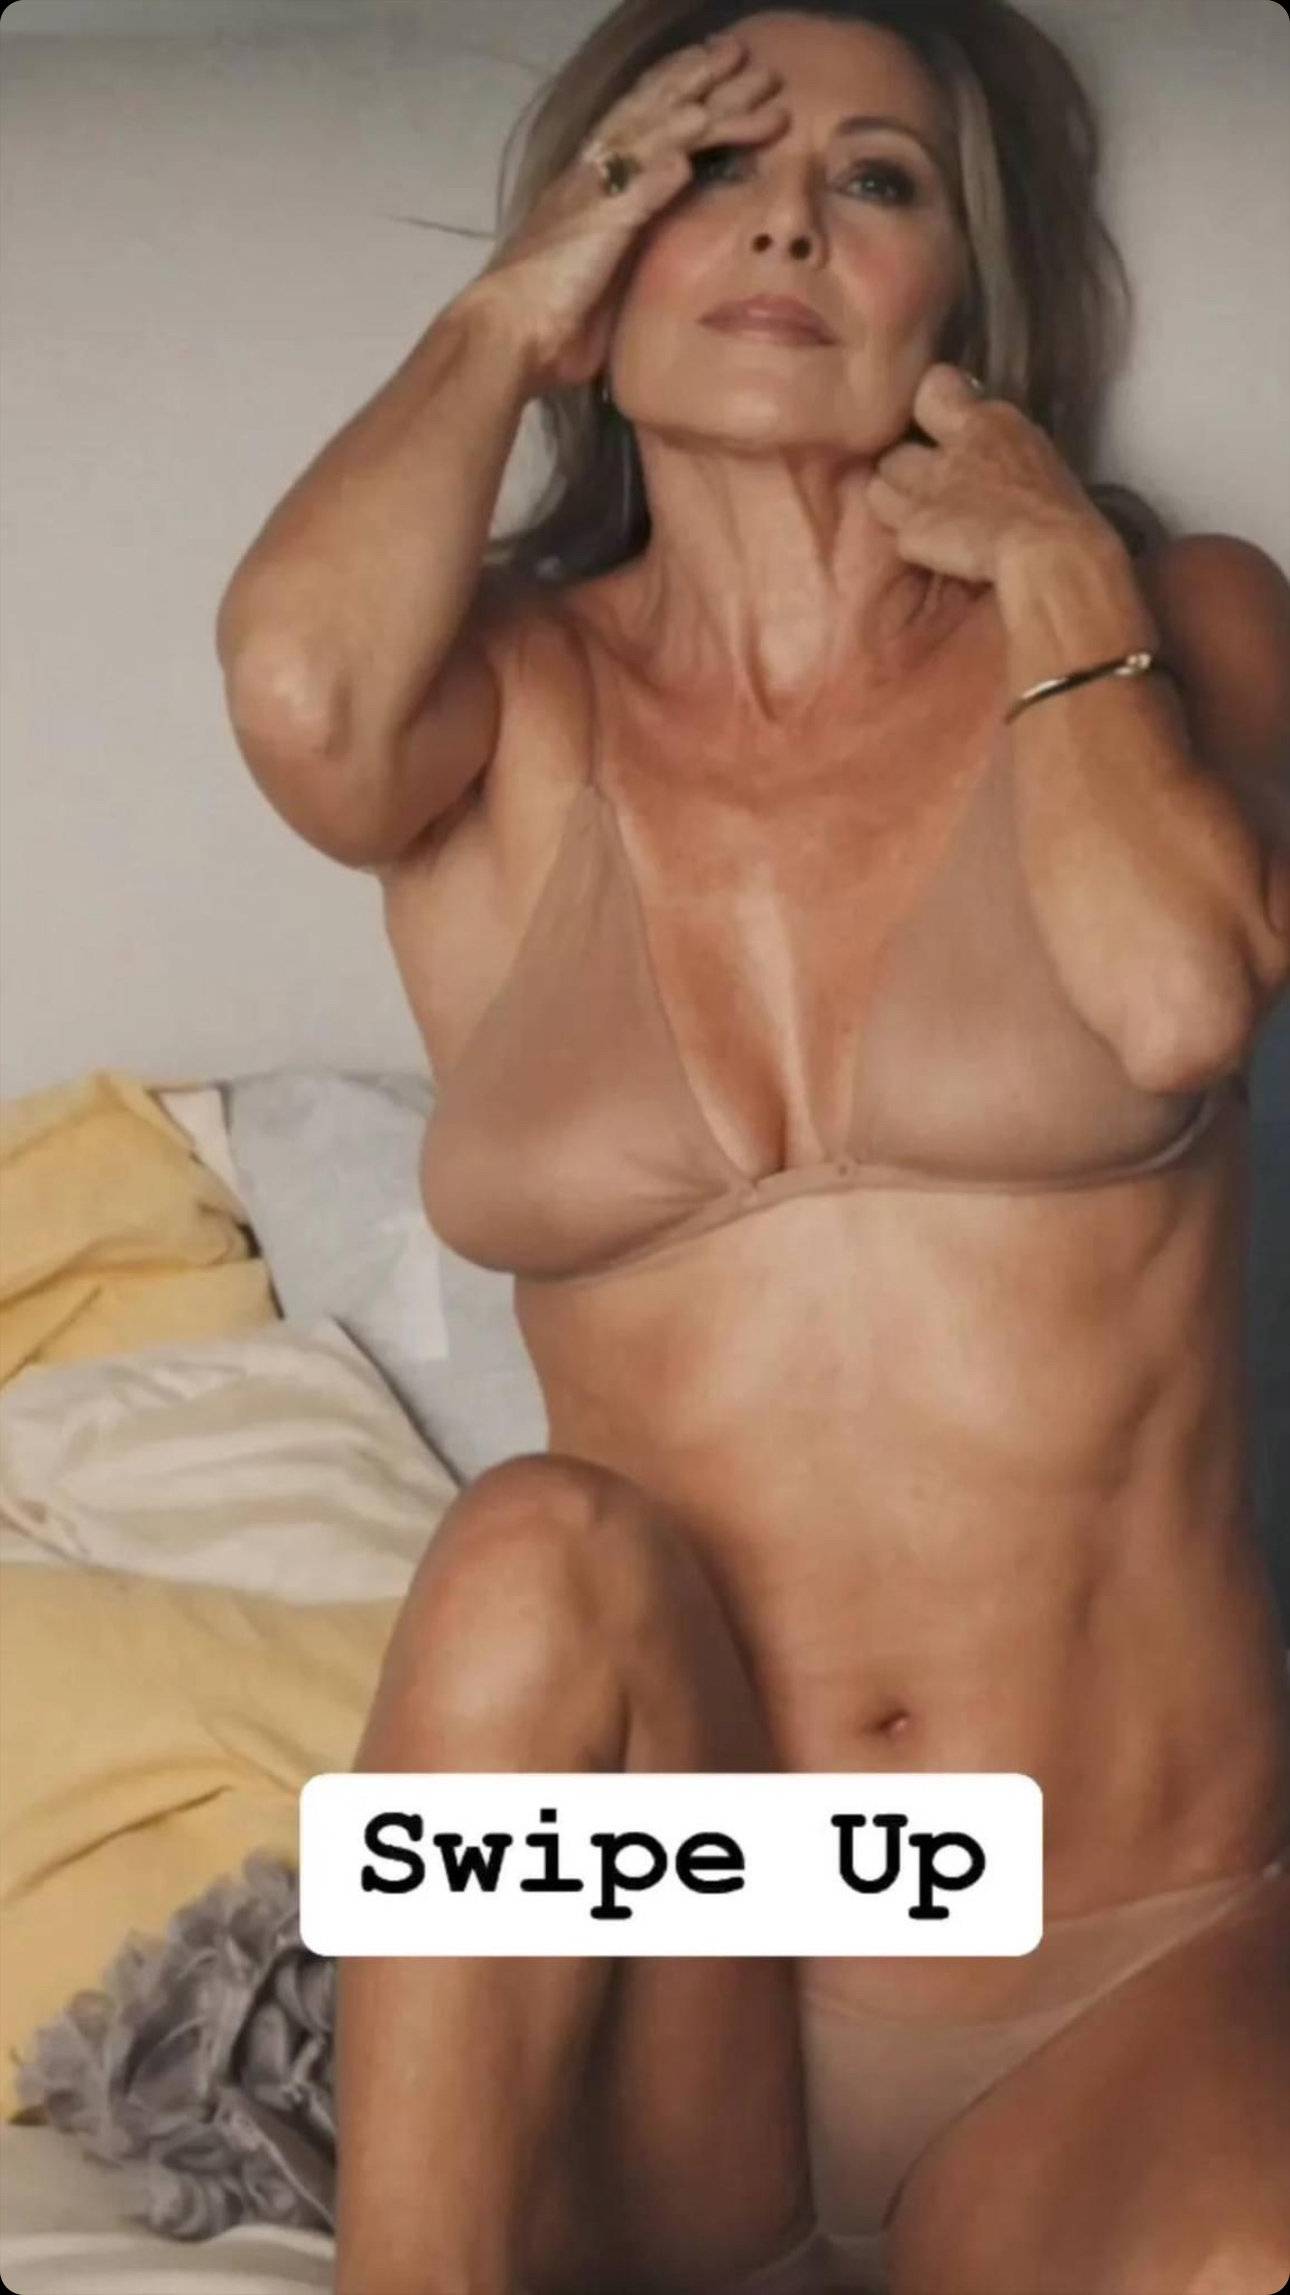 AGELESS APPEAL: CELEBRATING THE ALLURE OF THE SEXY OLDER WOMAN”